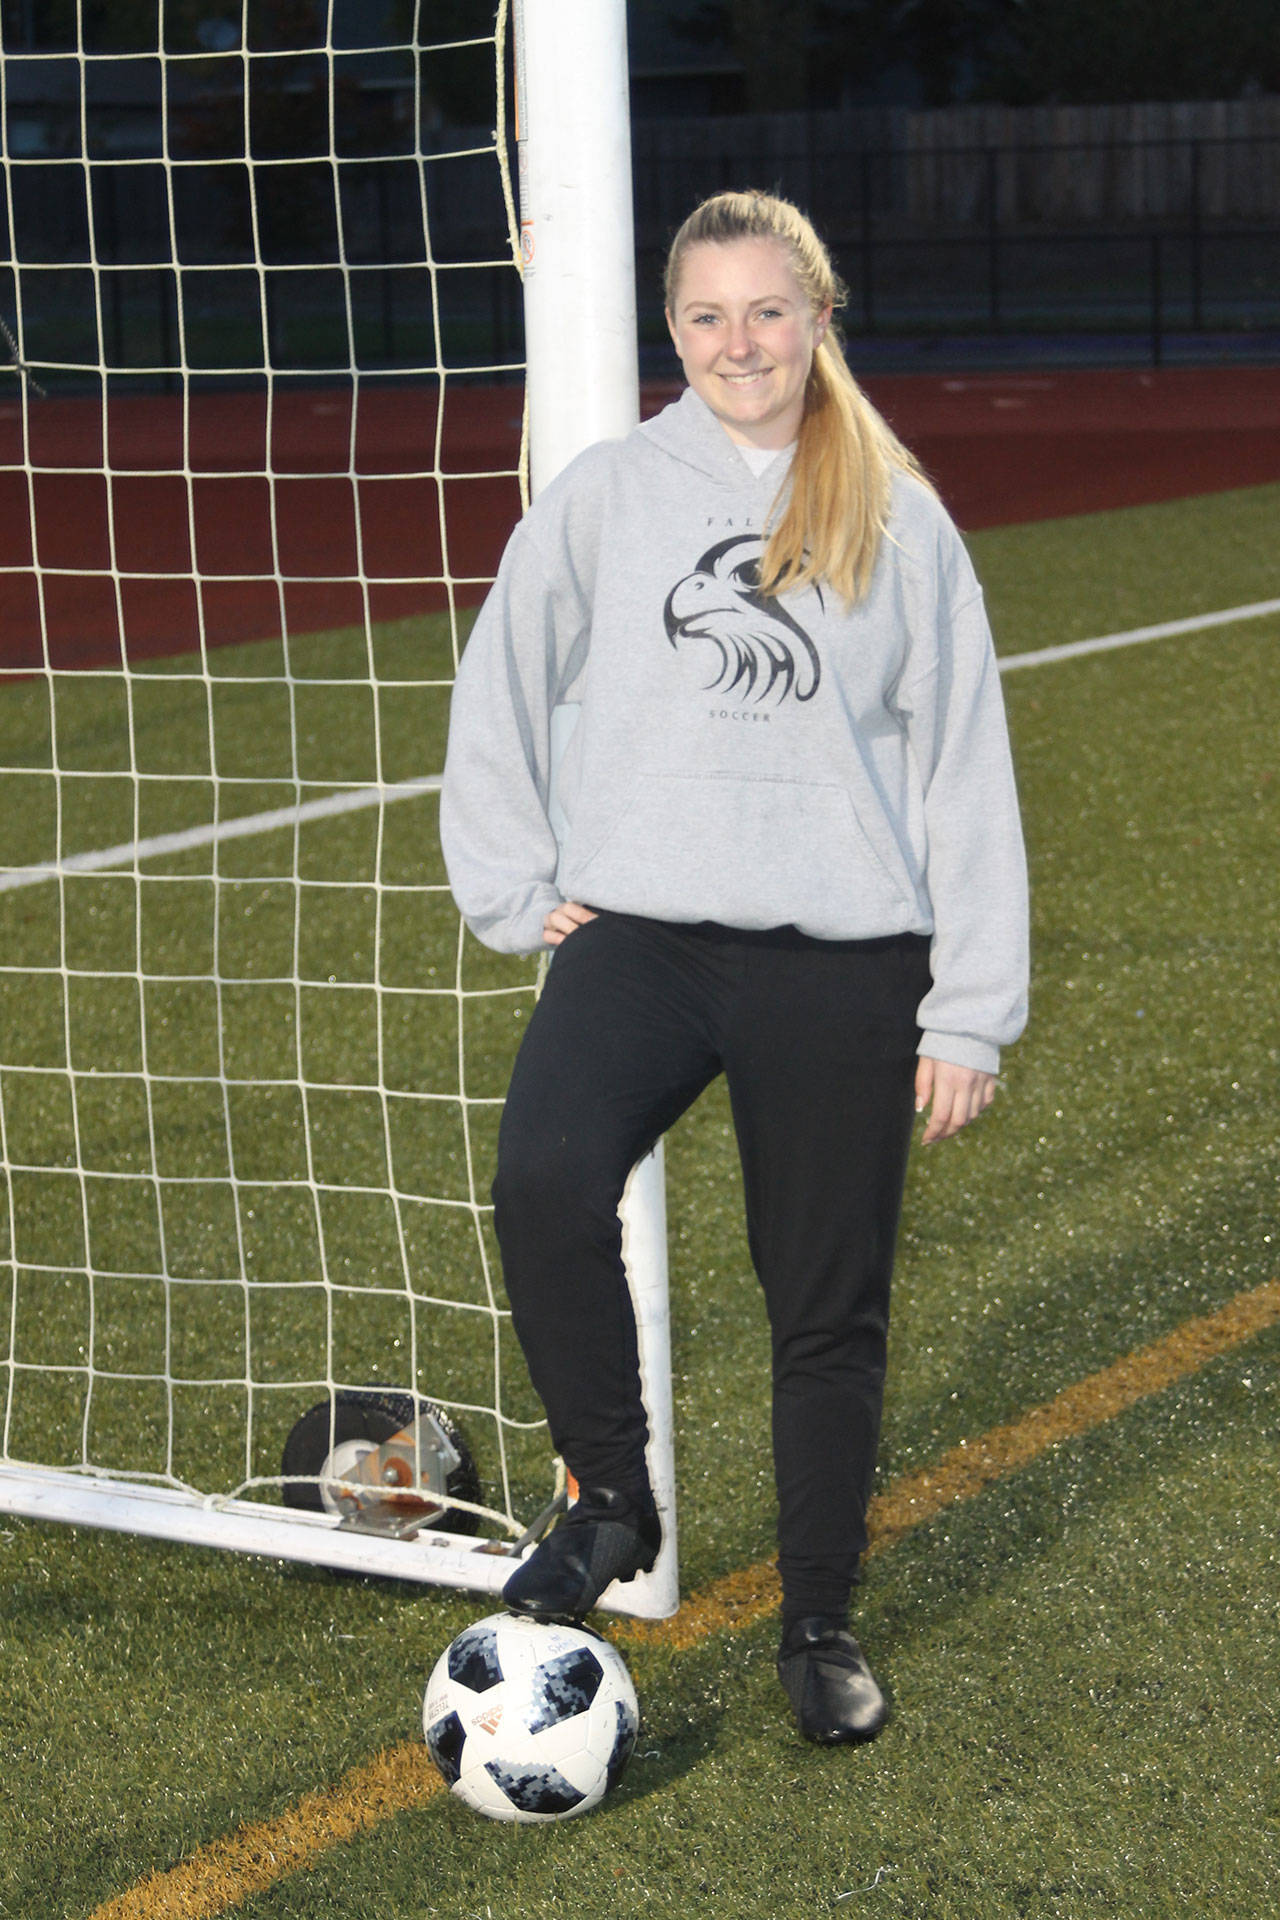 Maddy Drye, the only four-year member of the South Whidbey soccer team, has helped the Falcons grow into a successful program. (Photo by Jim Waller/South Whidbey Record)